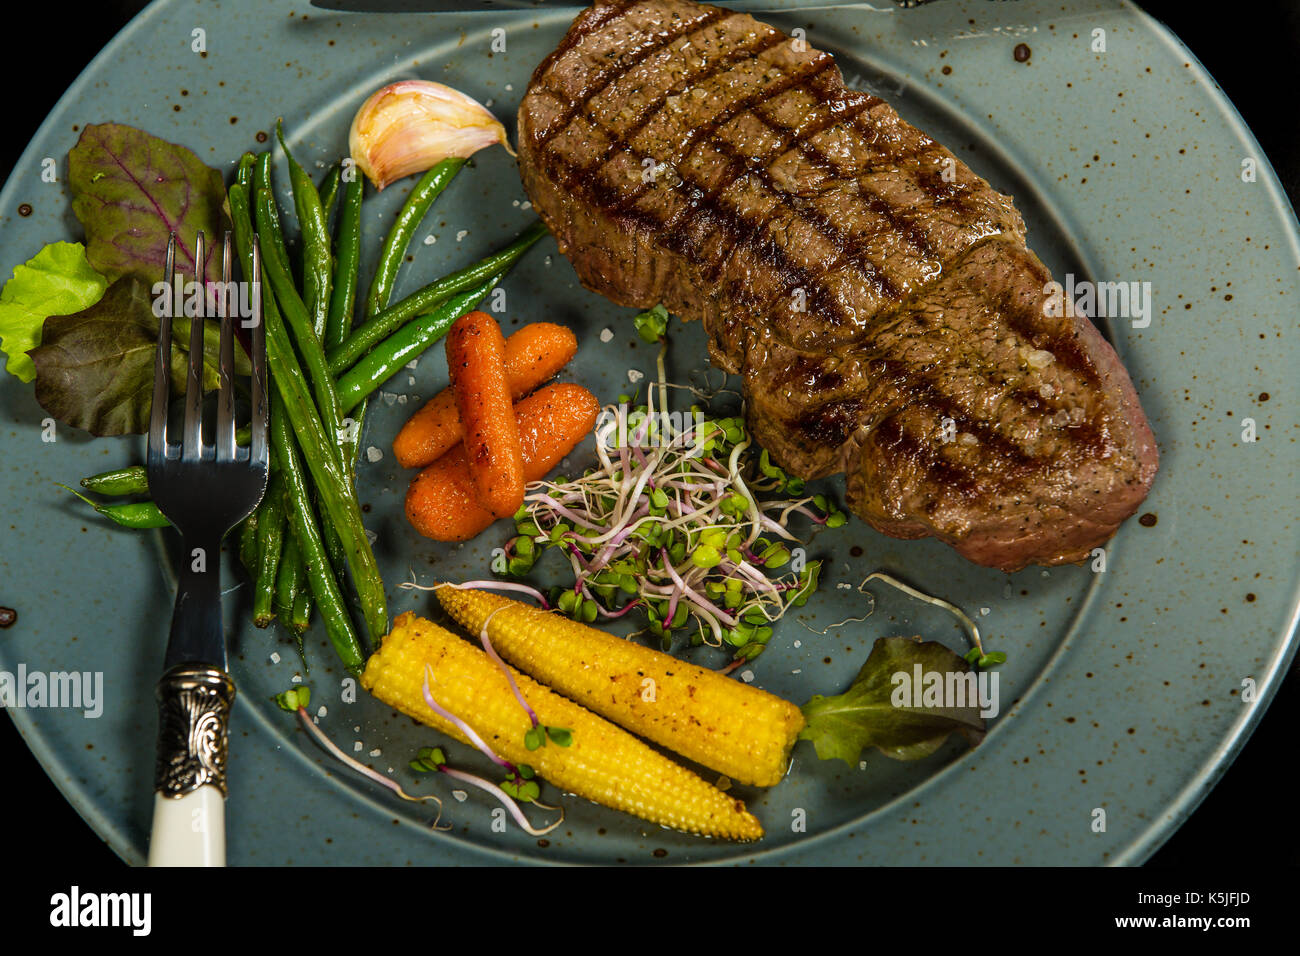 Grilled beef steak with glazed vegetables on the black background Stock Photo